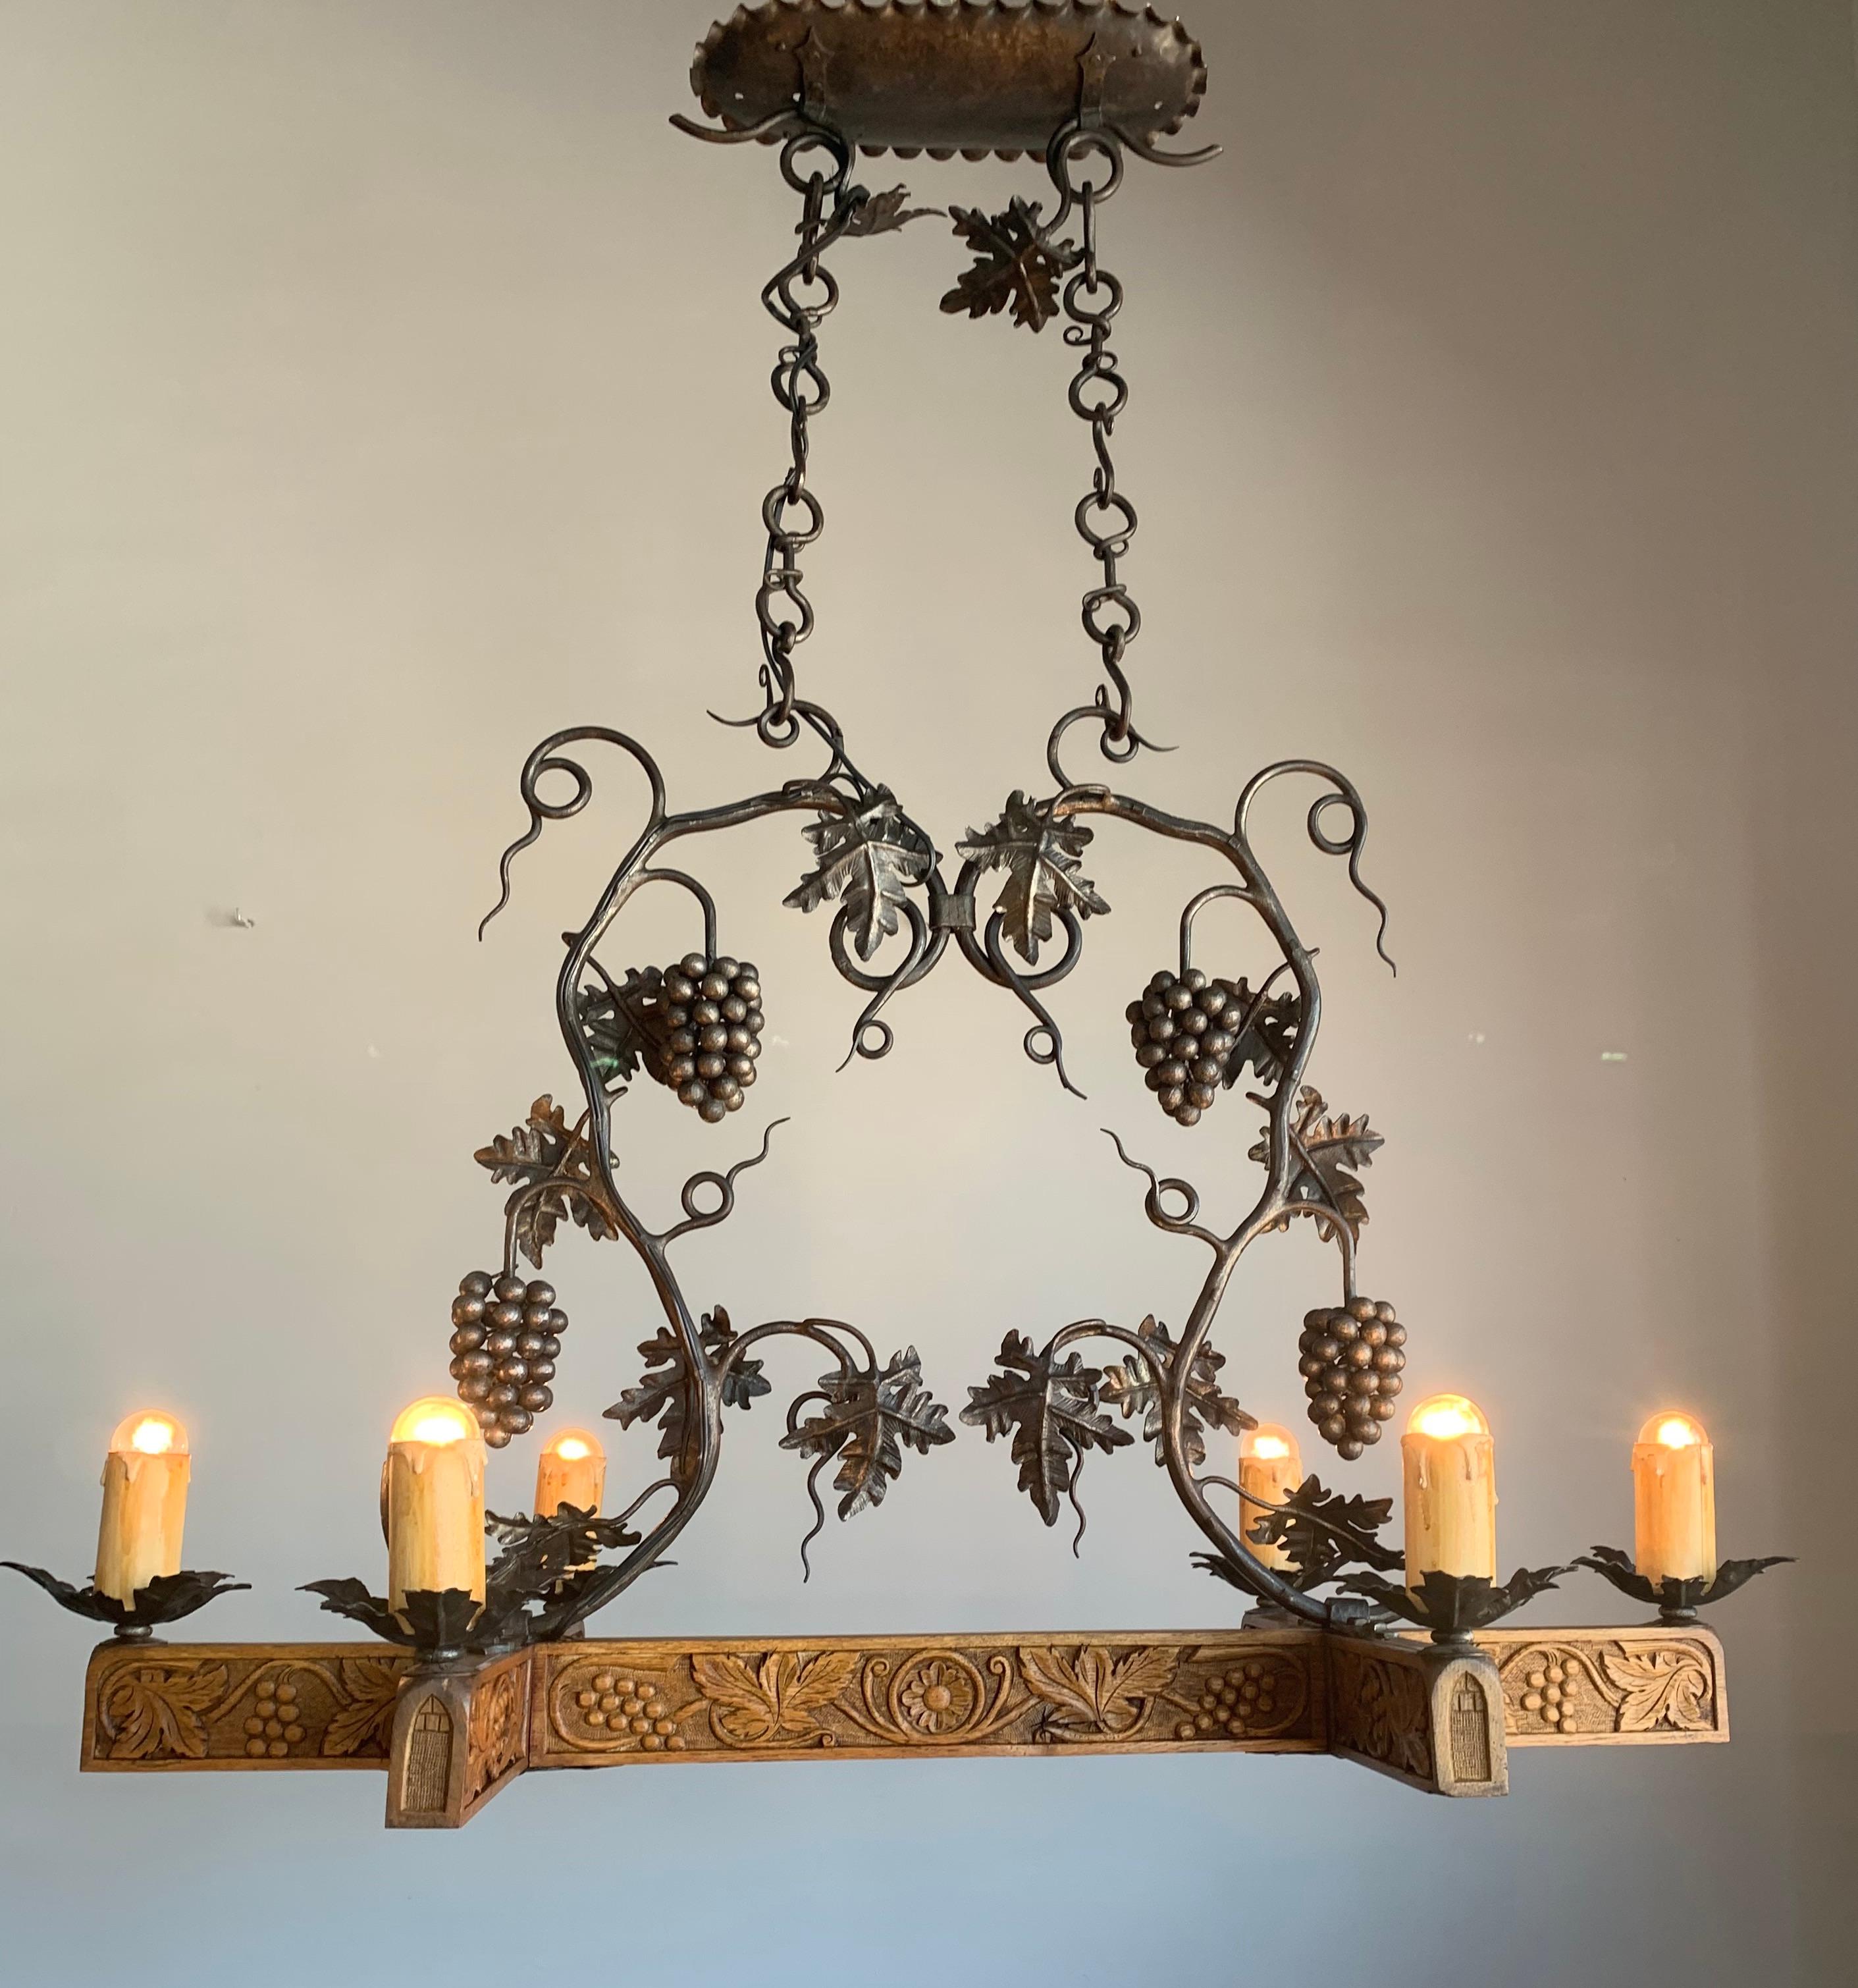 Stunning Horizontal Chandelier with Wrought Iron Grapes and Hand Carved Branches 10